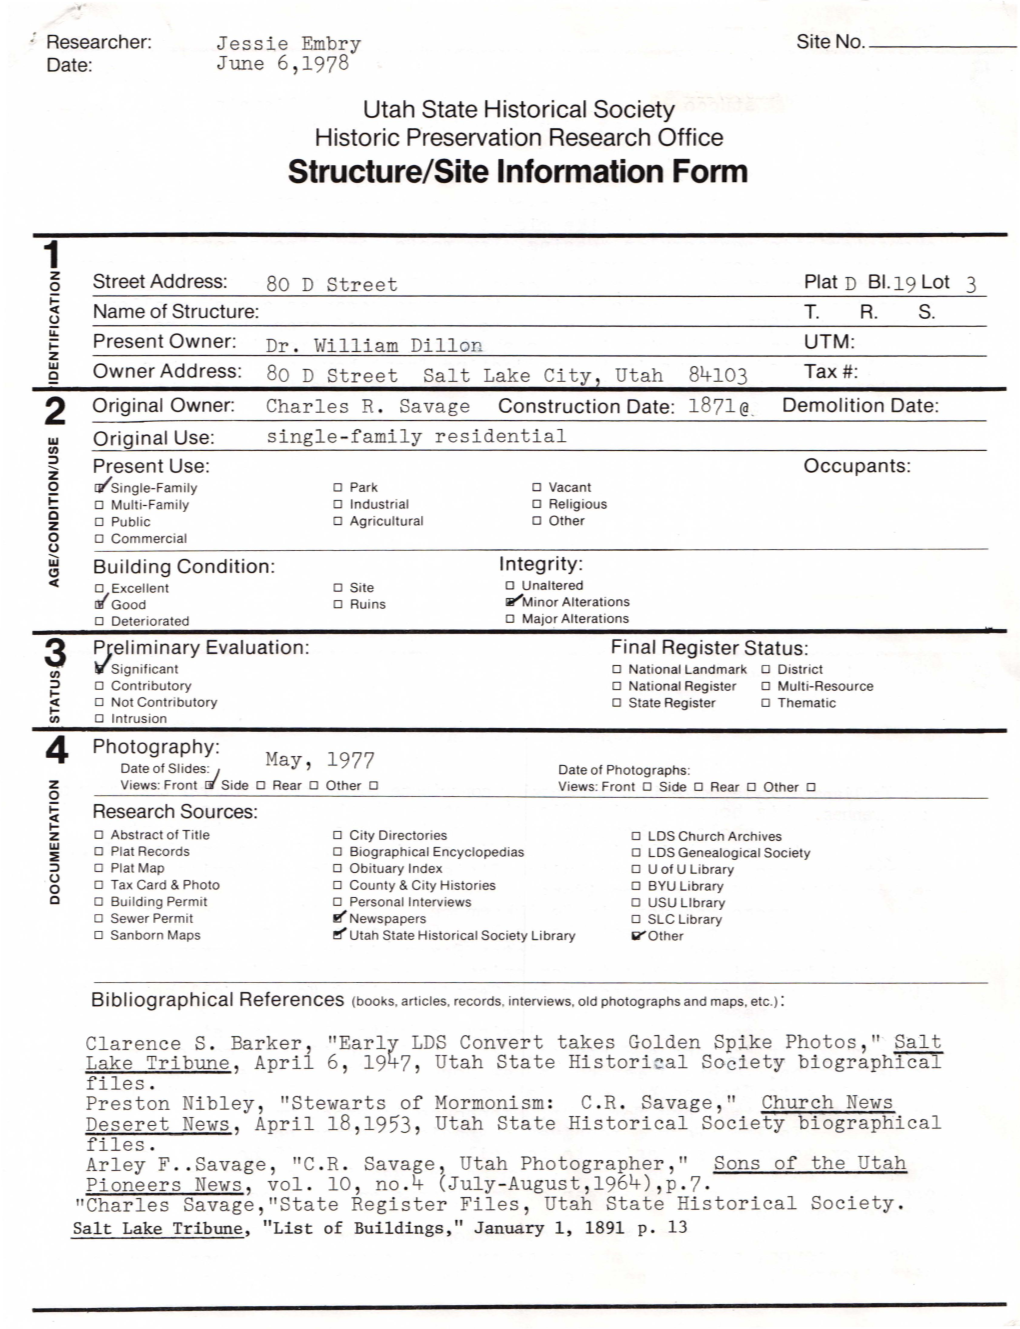 Structure/Site Information Form